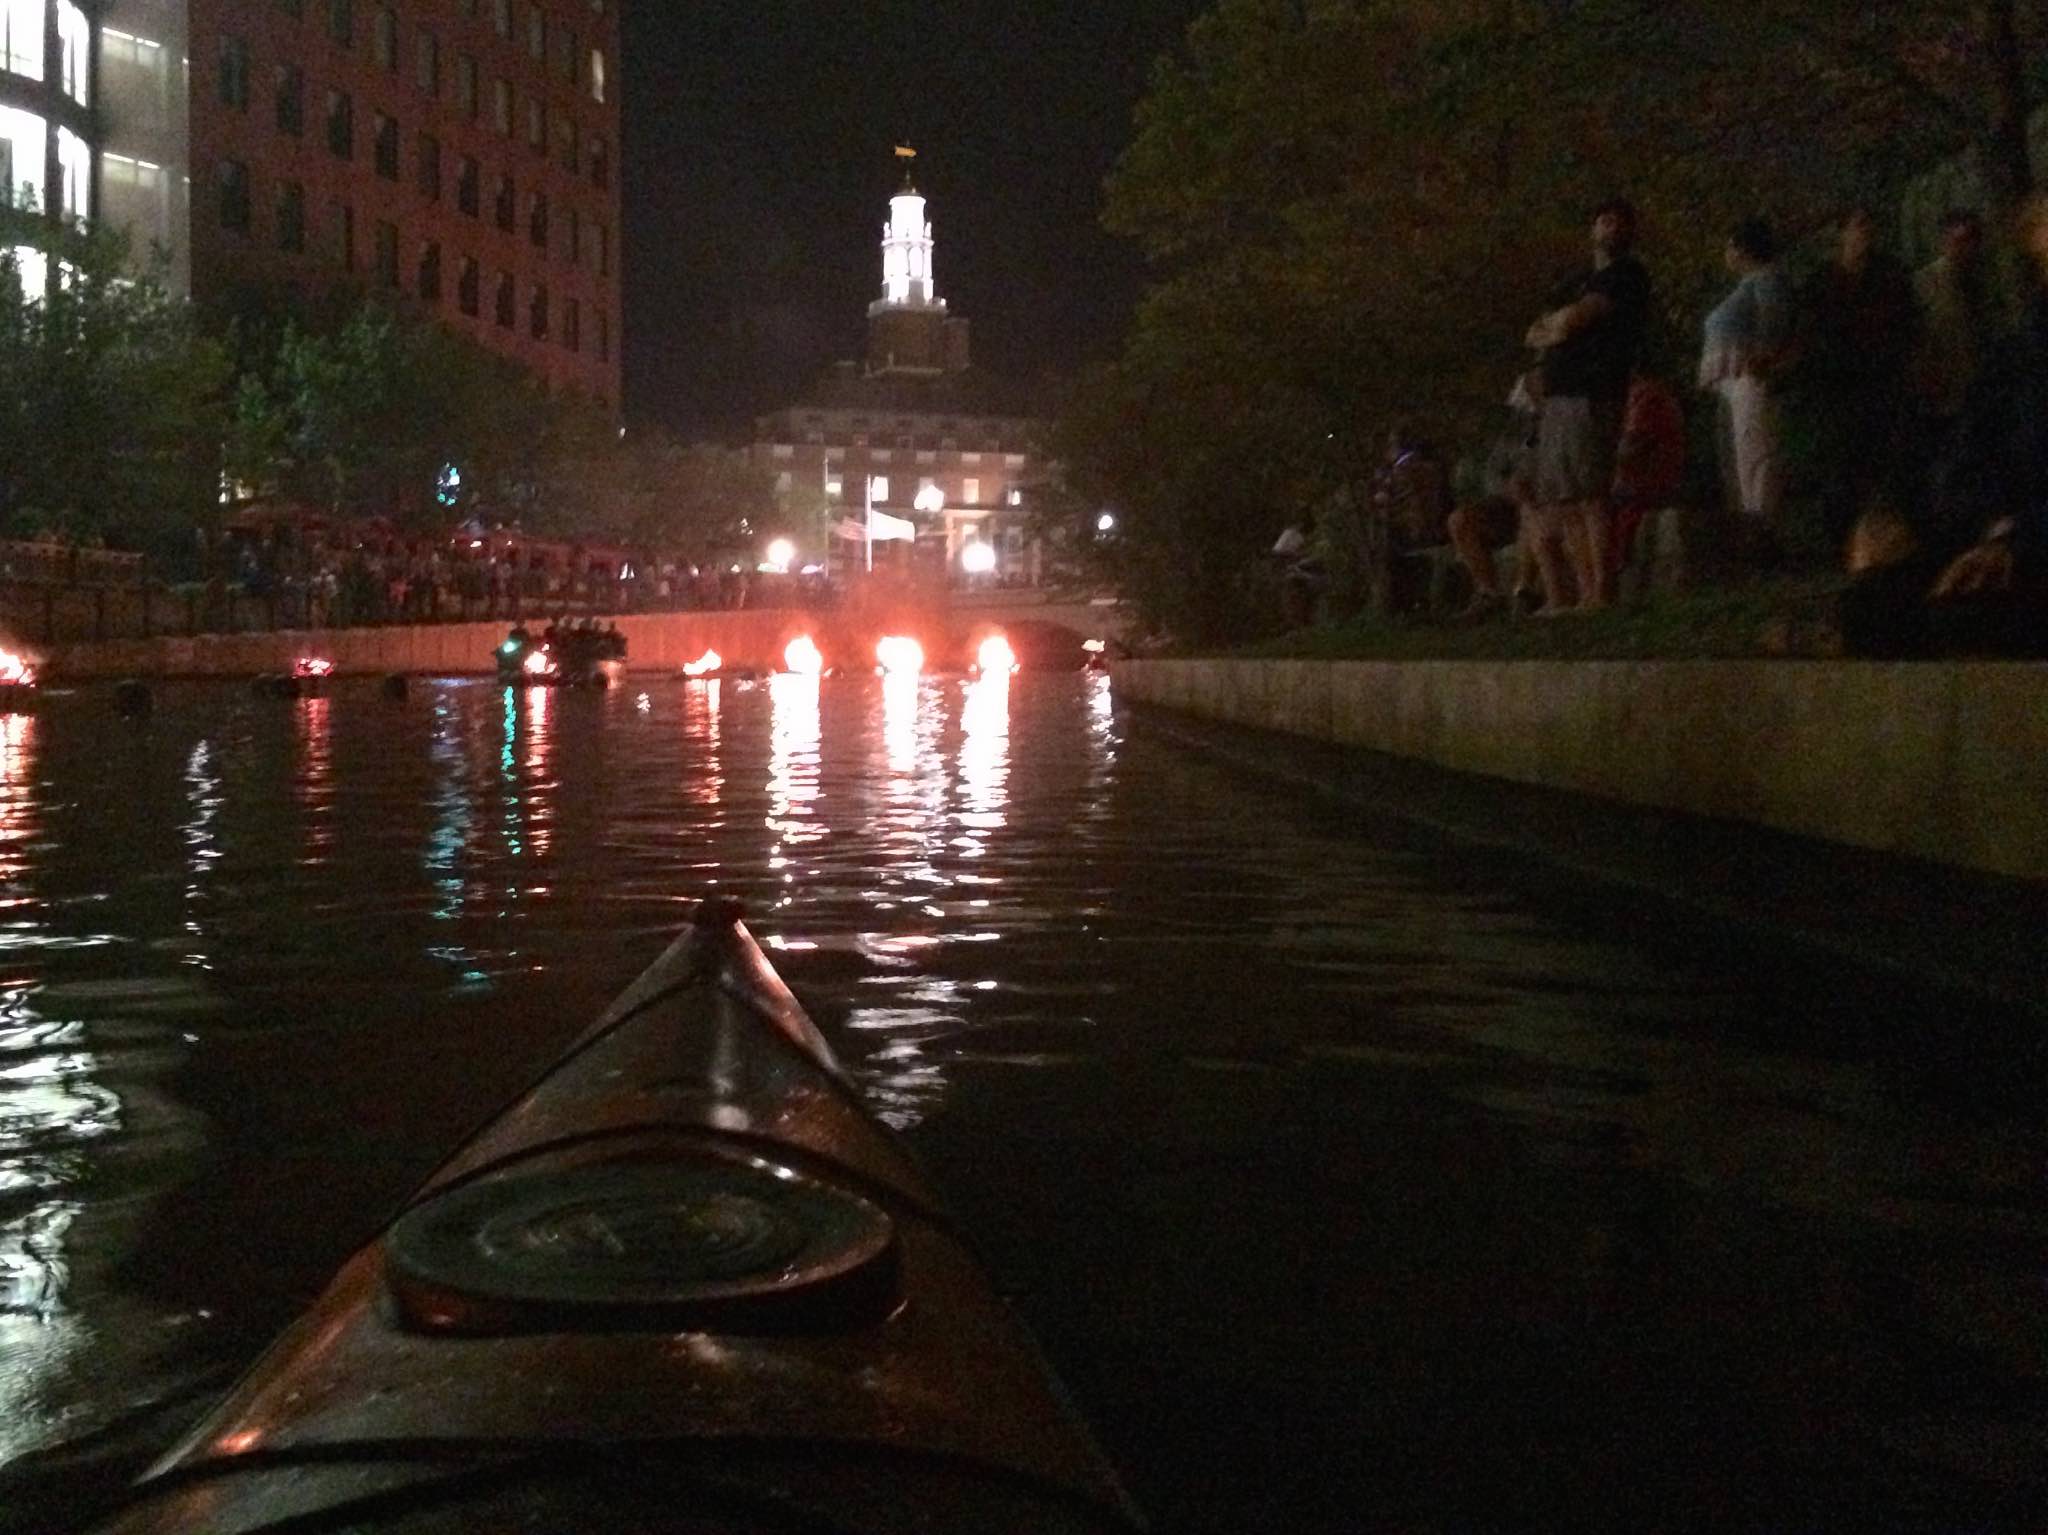 Waterfire from the river